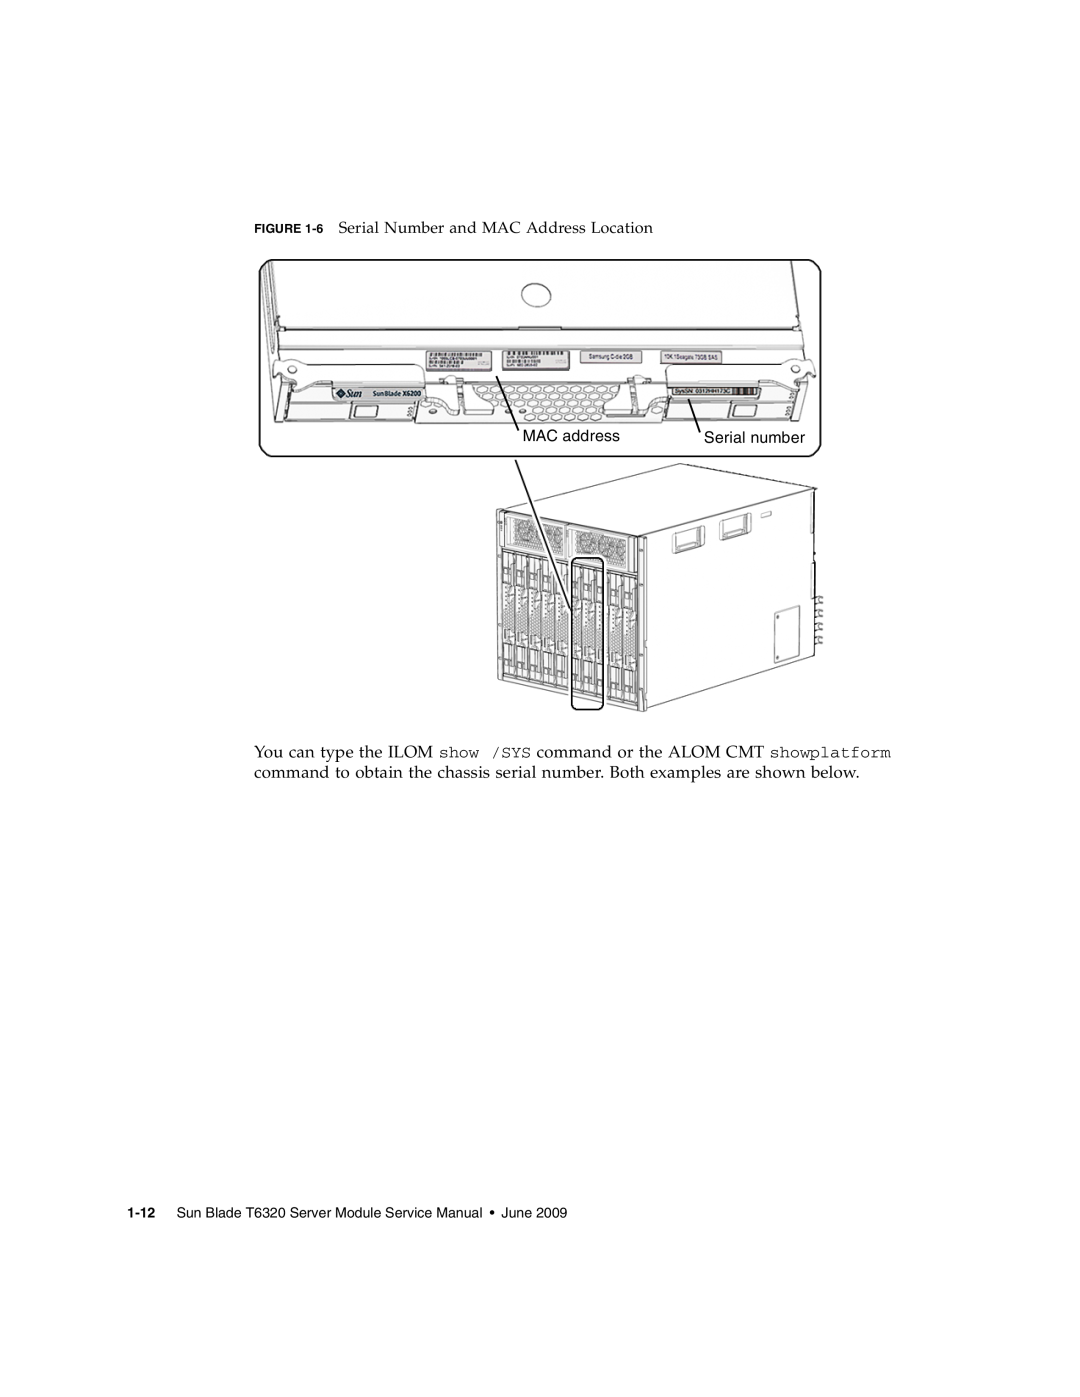 Sun Microsystems T6320 service manual 6 Serial Number and MAC Address Location, MAC address, Serial number 